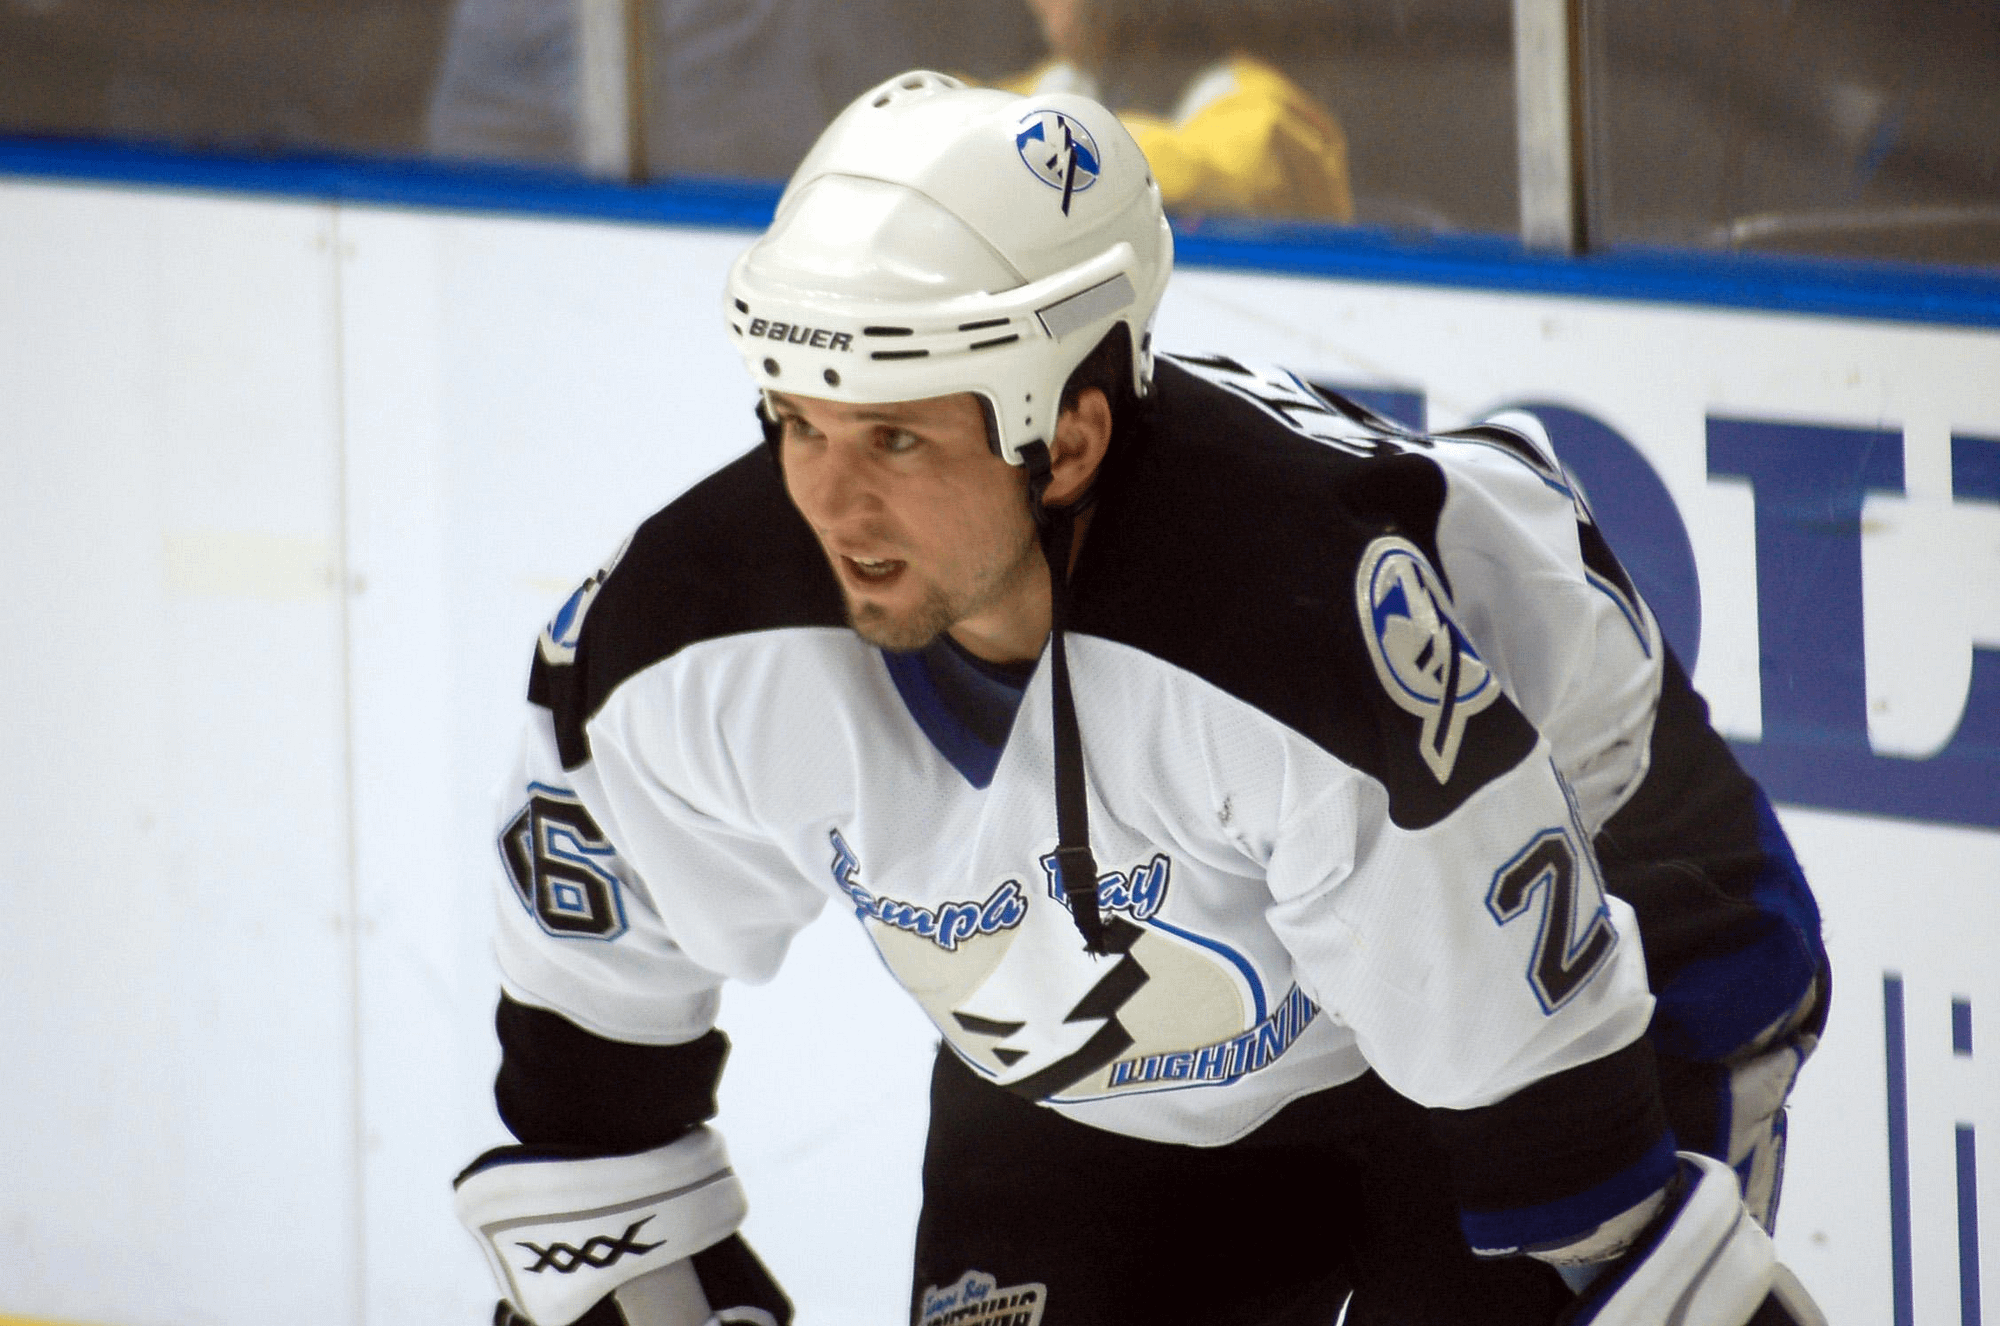 Martin St. Louis was undrafted but his response to hardship made him an elite player.